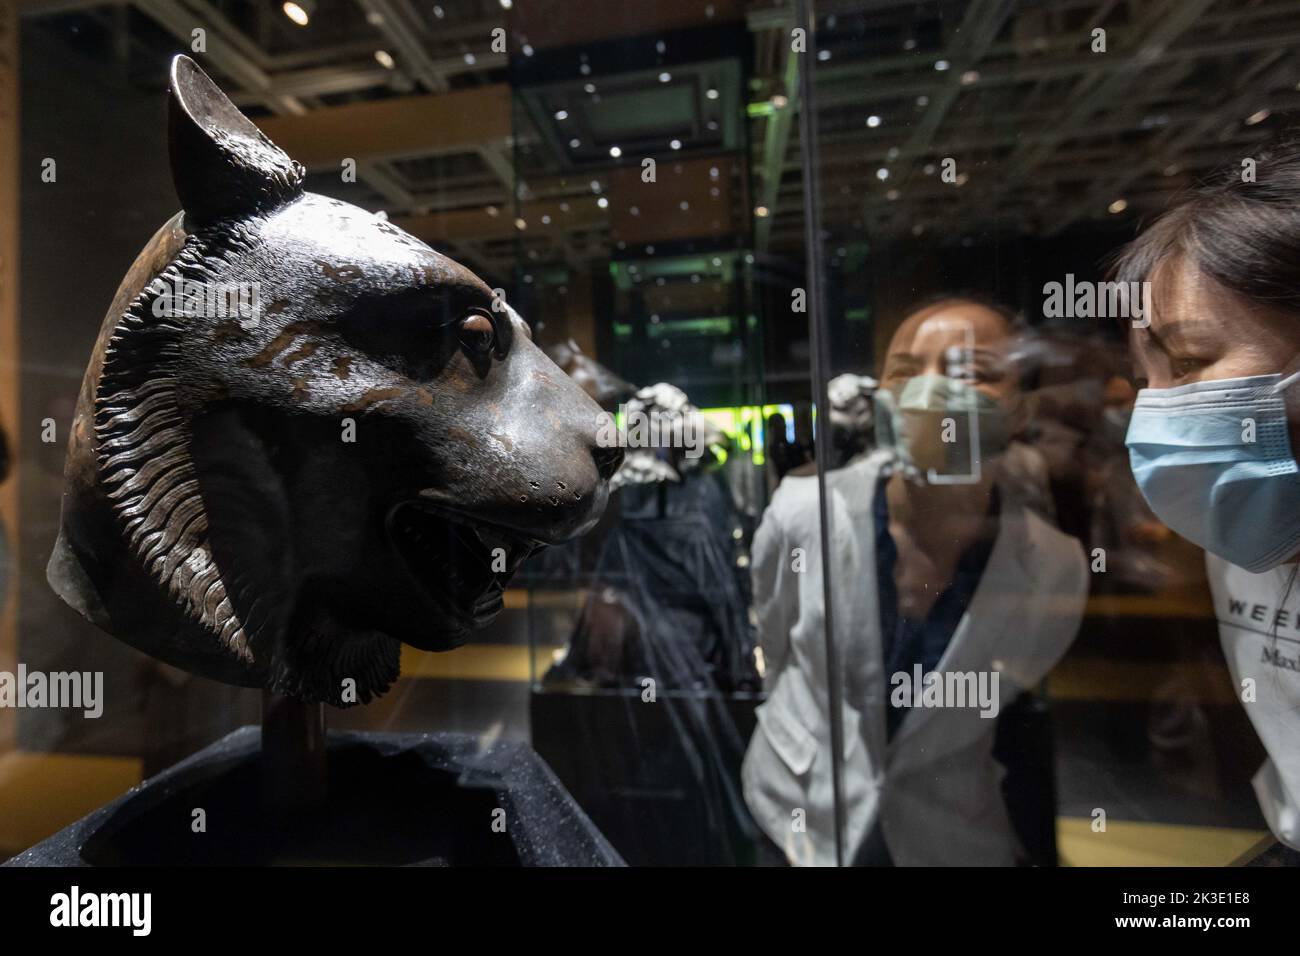 (220926) -- SHANGHAI, Sept. 26, 2022 (Xinhua) -- Visitors view a bronze tiger head at the exhibition 'Return in Golden Age: China's Retrieved Cultural Relics Exhibition' in east China's Shanghai, Sept. 26, 2022. 'Return in Golden Age: China's Retrieved Cultural Relics Exhibition' was launched Monday at the Minhang Museum in east China's Shanghai. The exhibition features China's cultural relics retrieved from overseas and now kept by the Poly Art Museum and the administration office of the Yuanmingyuan. Among the exhibits are bronze Chinese zodiac animal heads that belonged to the Yuanmingyuan Stock Photo